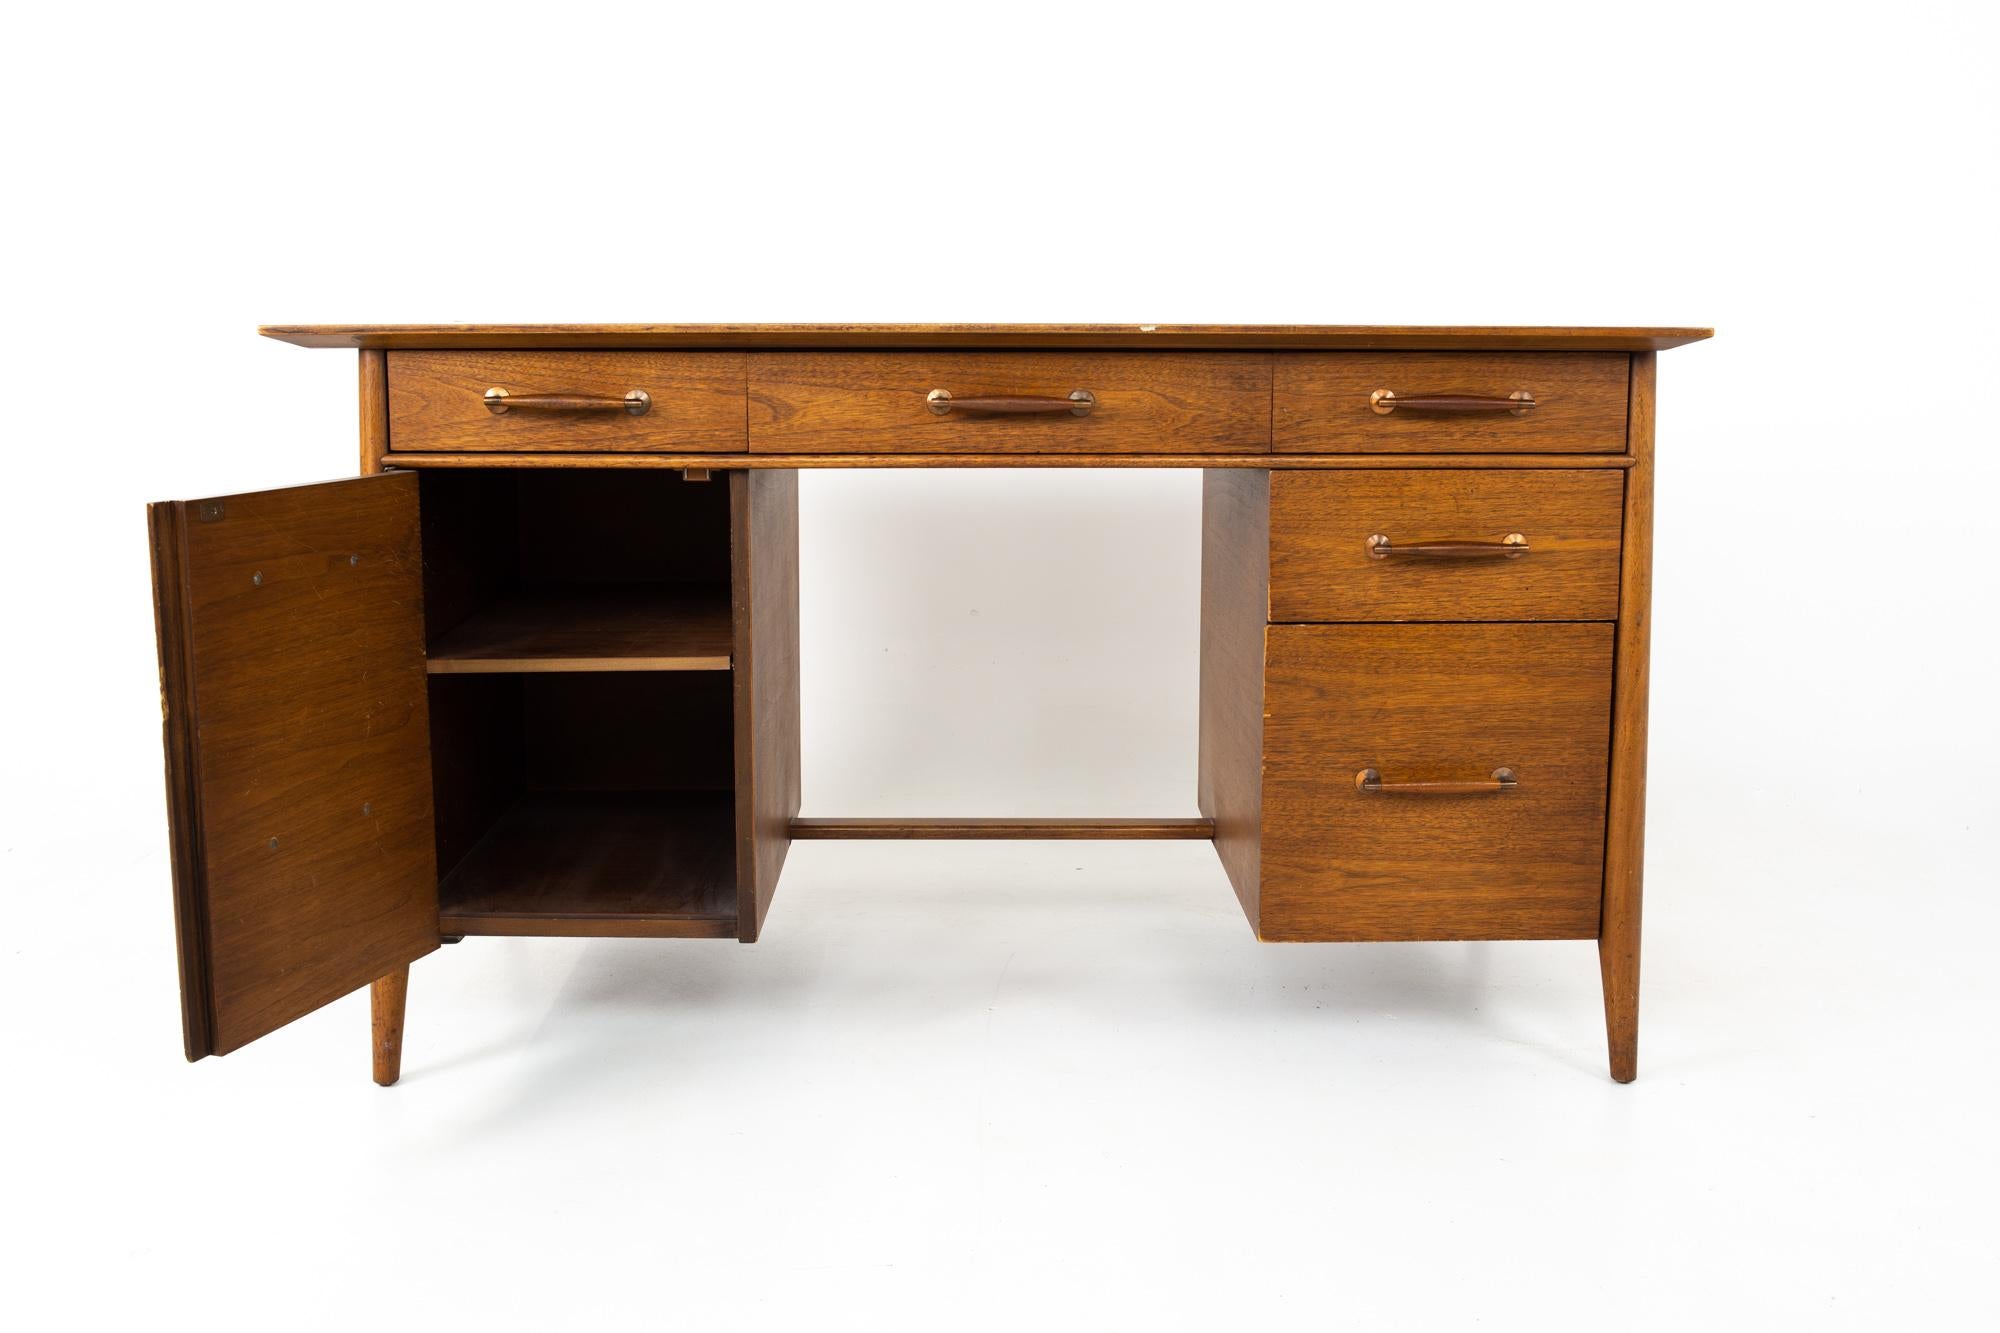 Paul McCobb style Henredon heritage Mid Century walnut 1-door 5-drawer desk
Desk measures: 54 wide x 28 deep x 30.5 high

All pieces of furniture can be had in what we call restored vintage condition. This means the piece is restored upon purchase